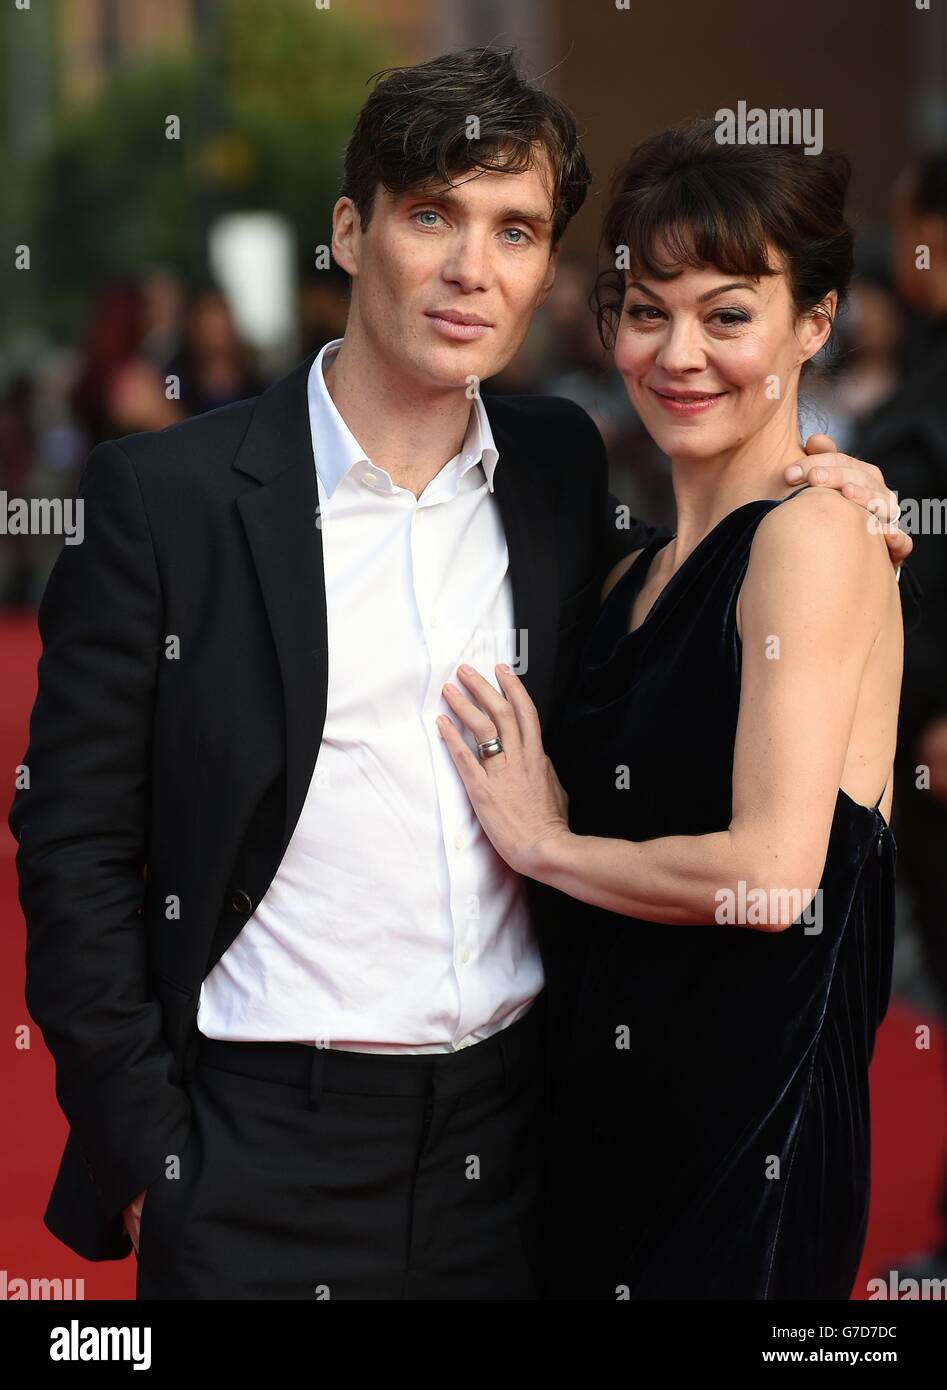 Cillian Murphy and Helen McCrory at the premiere of Peaky Blinders: Series 2 at Broad Street Cineworld, Birmingham. Stock Photo